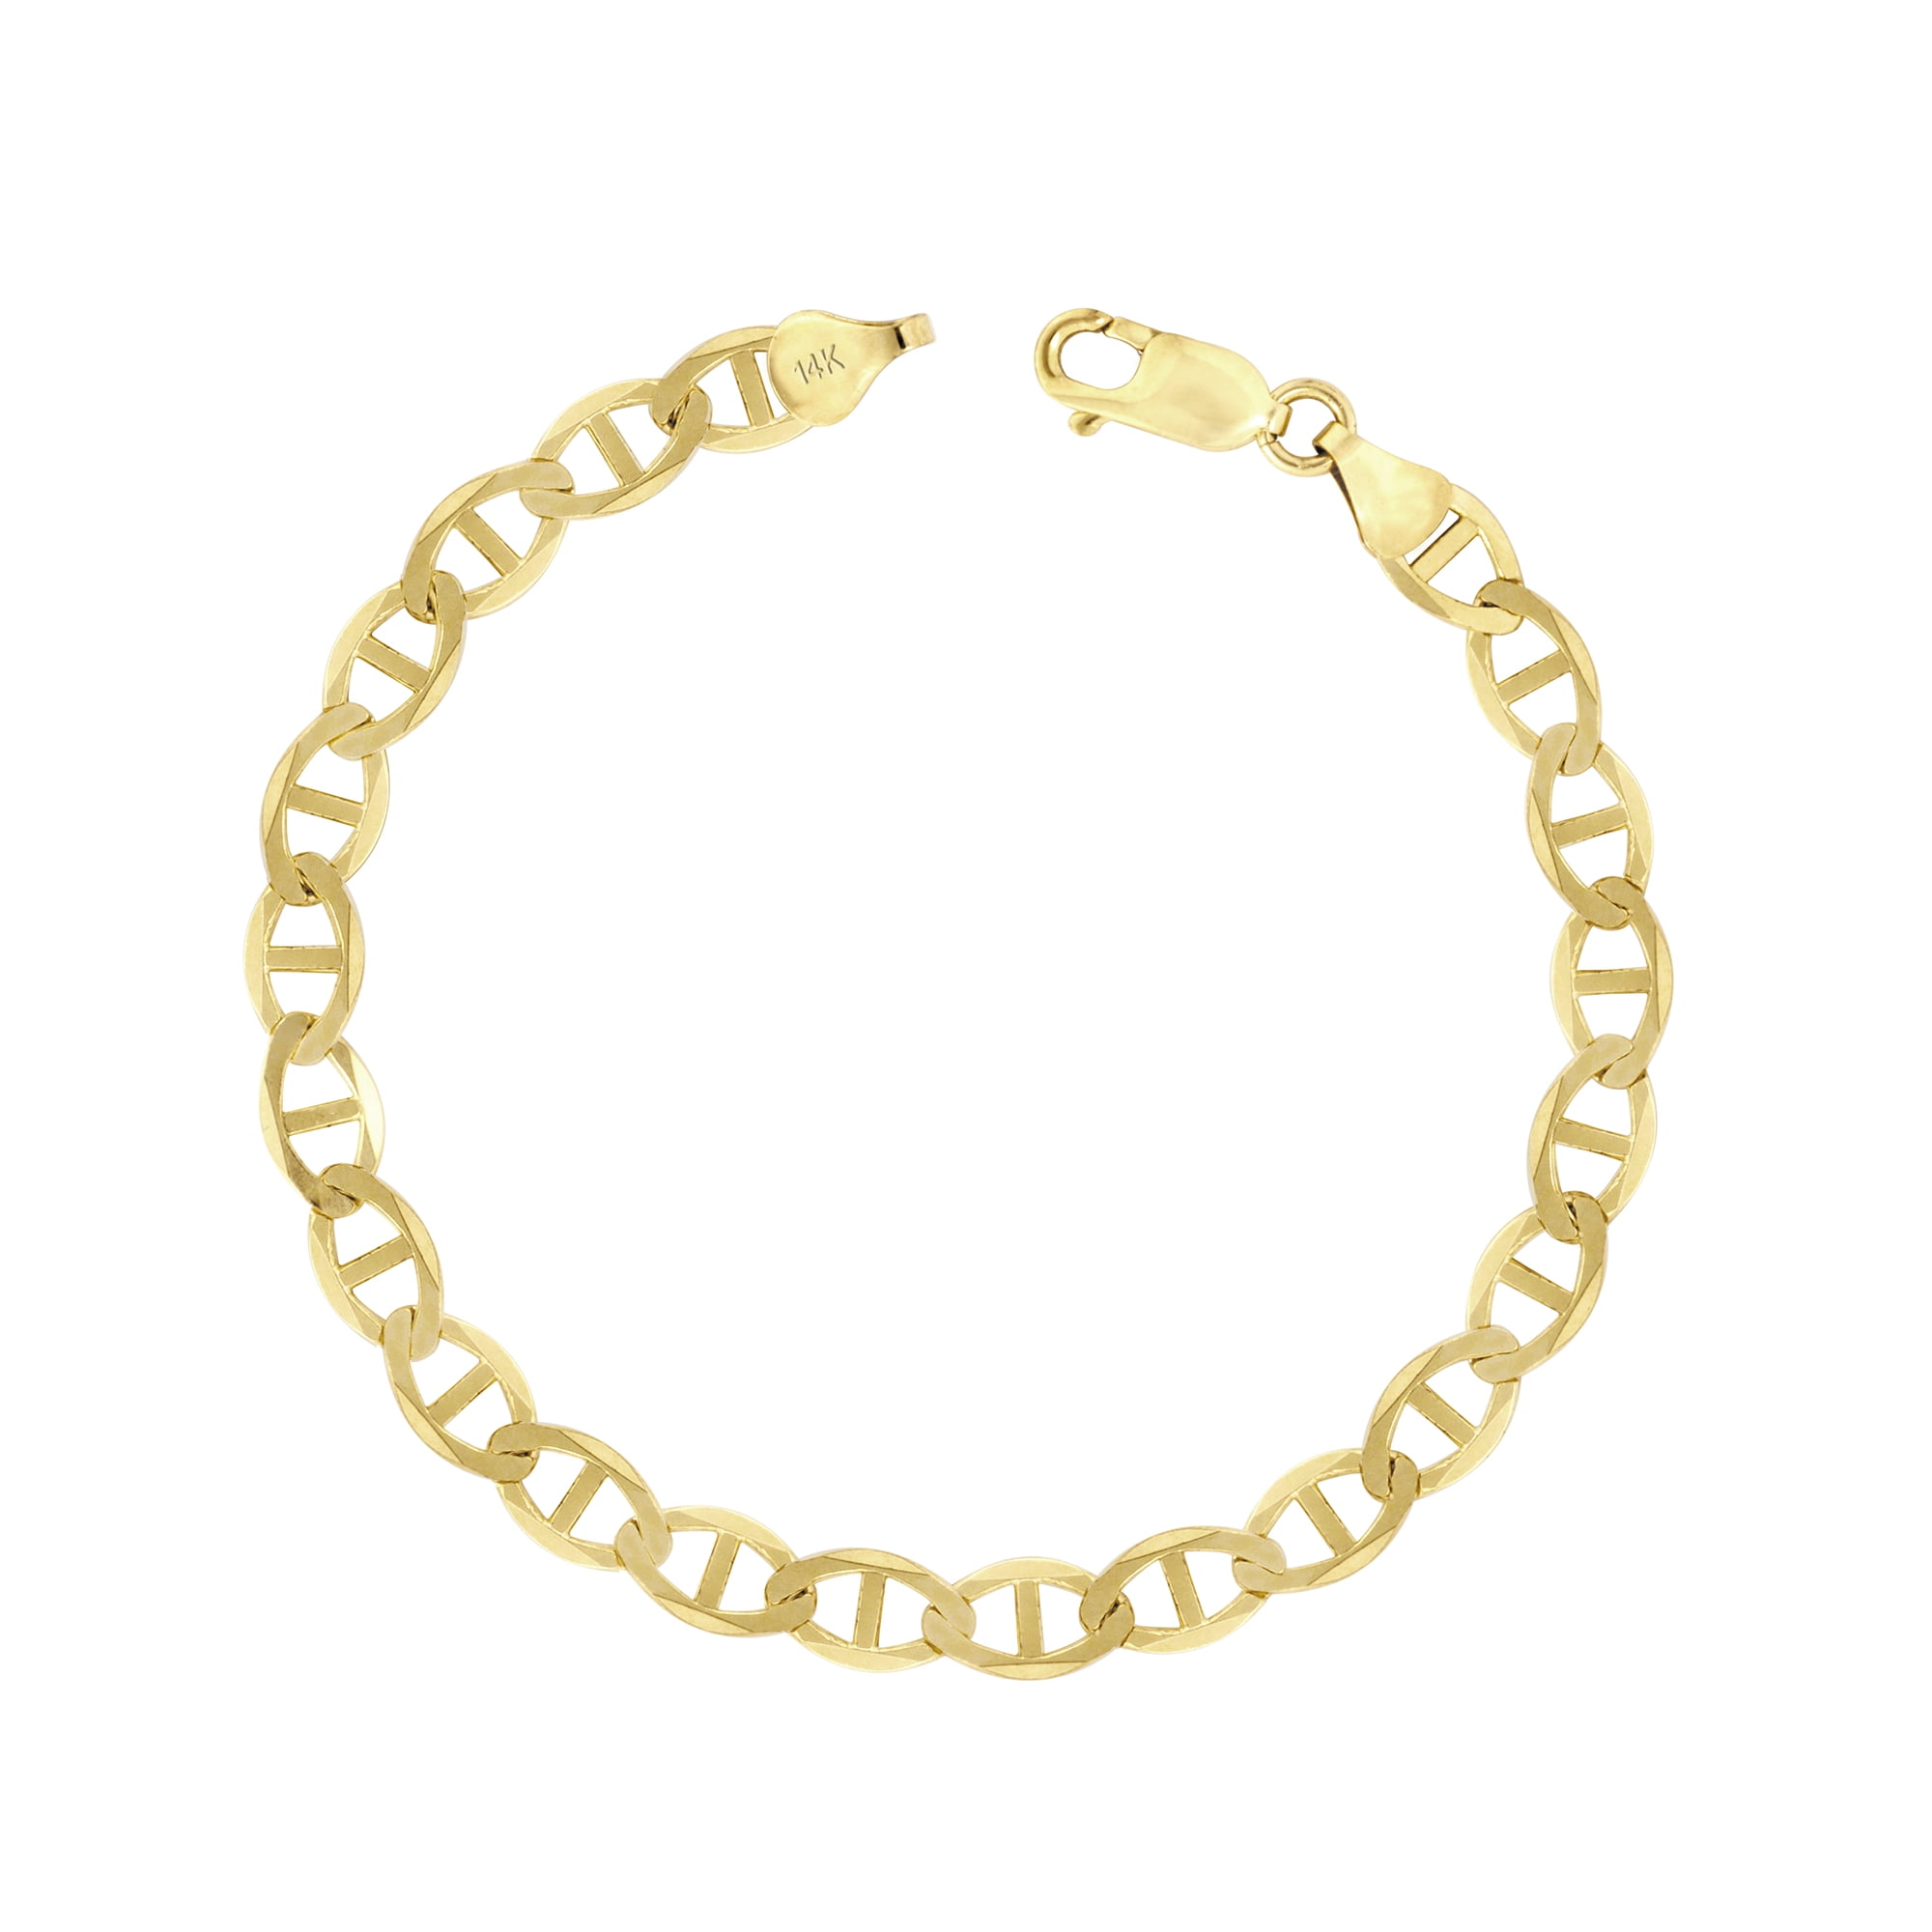 Italian Collection - 14k Yellow Gold 7mm Curb Link Chain Bracelet - 7.50